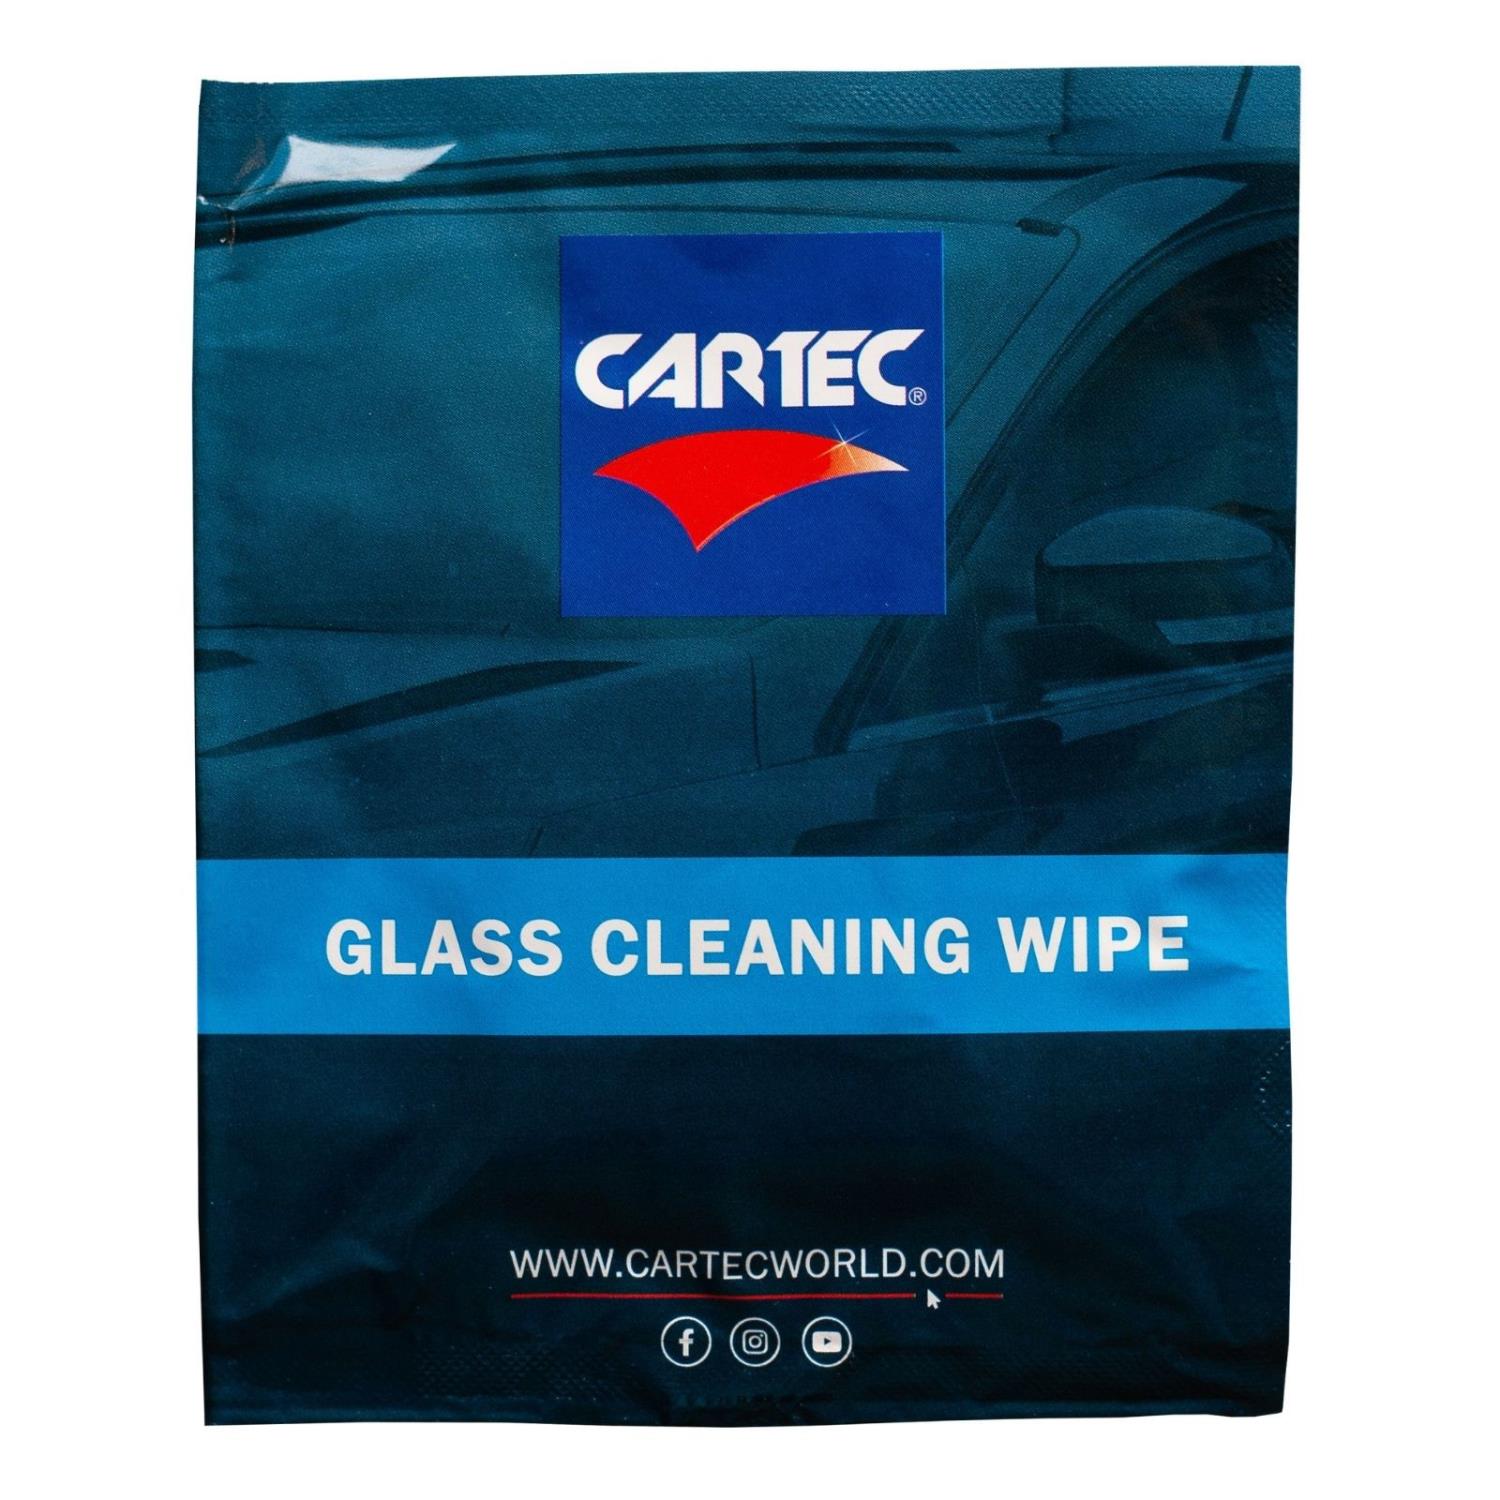 Cartec Glass Cleaning Wipe